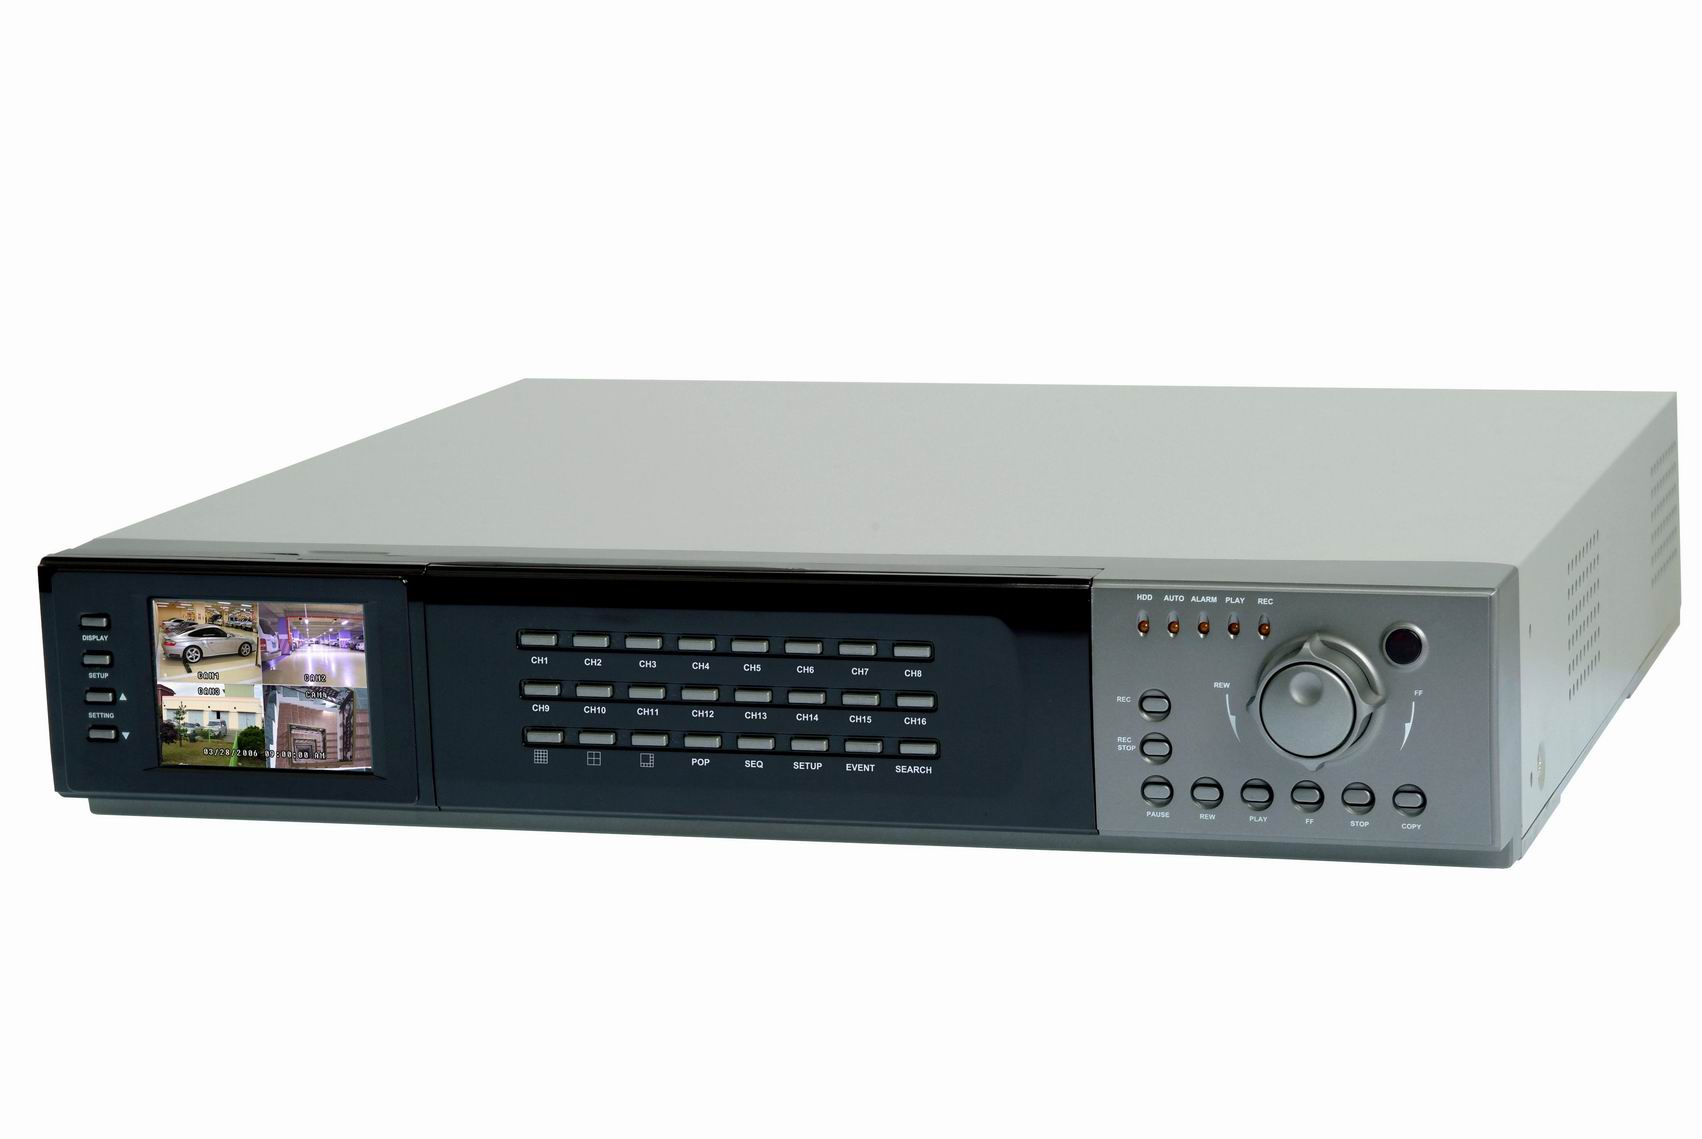 DVR Stand-Alone (16ch, MPEG4)-Bvr516 (DVR Stand-Alone (16ch, MPEG4)-Bvr516)